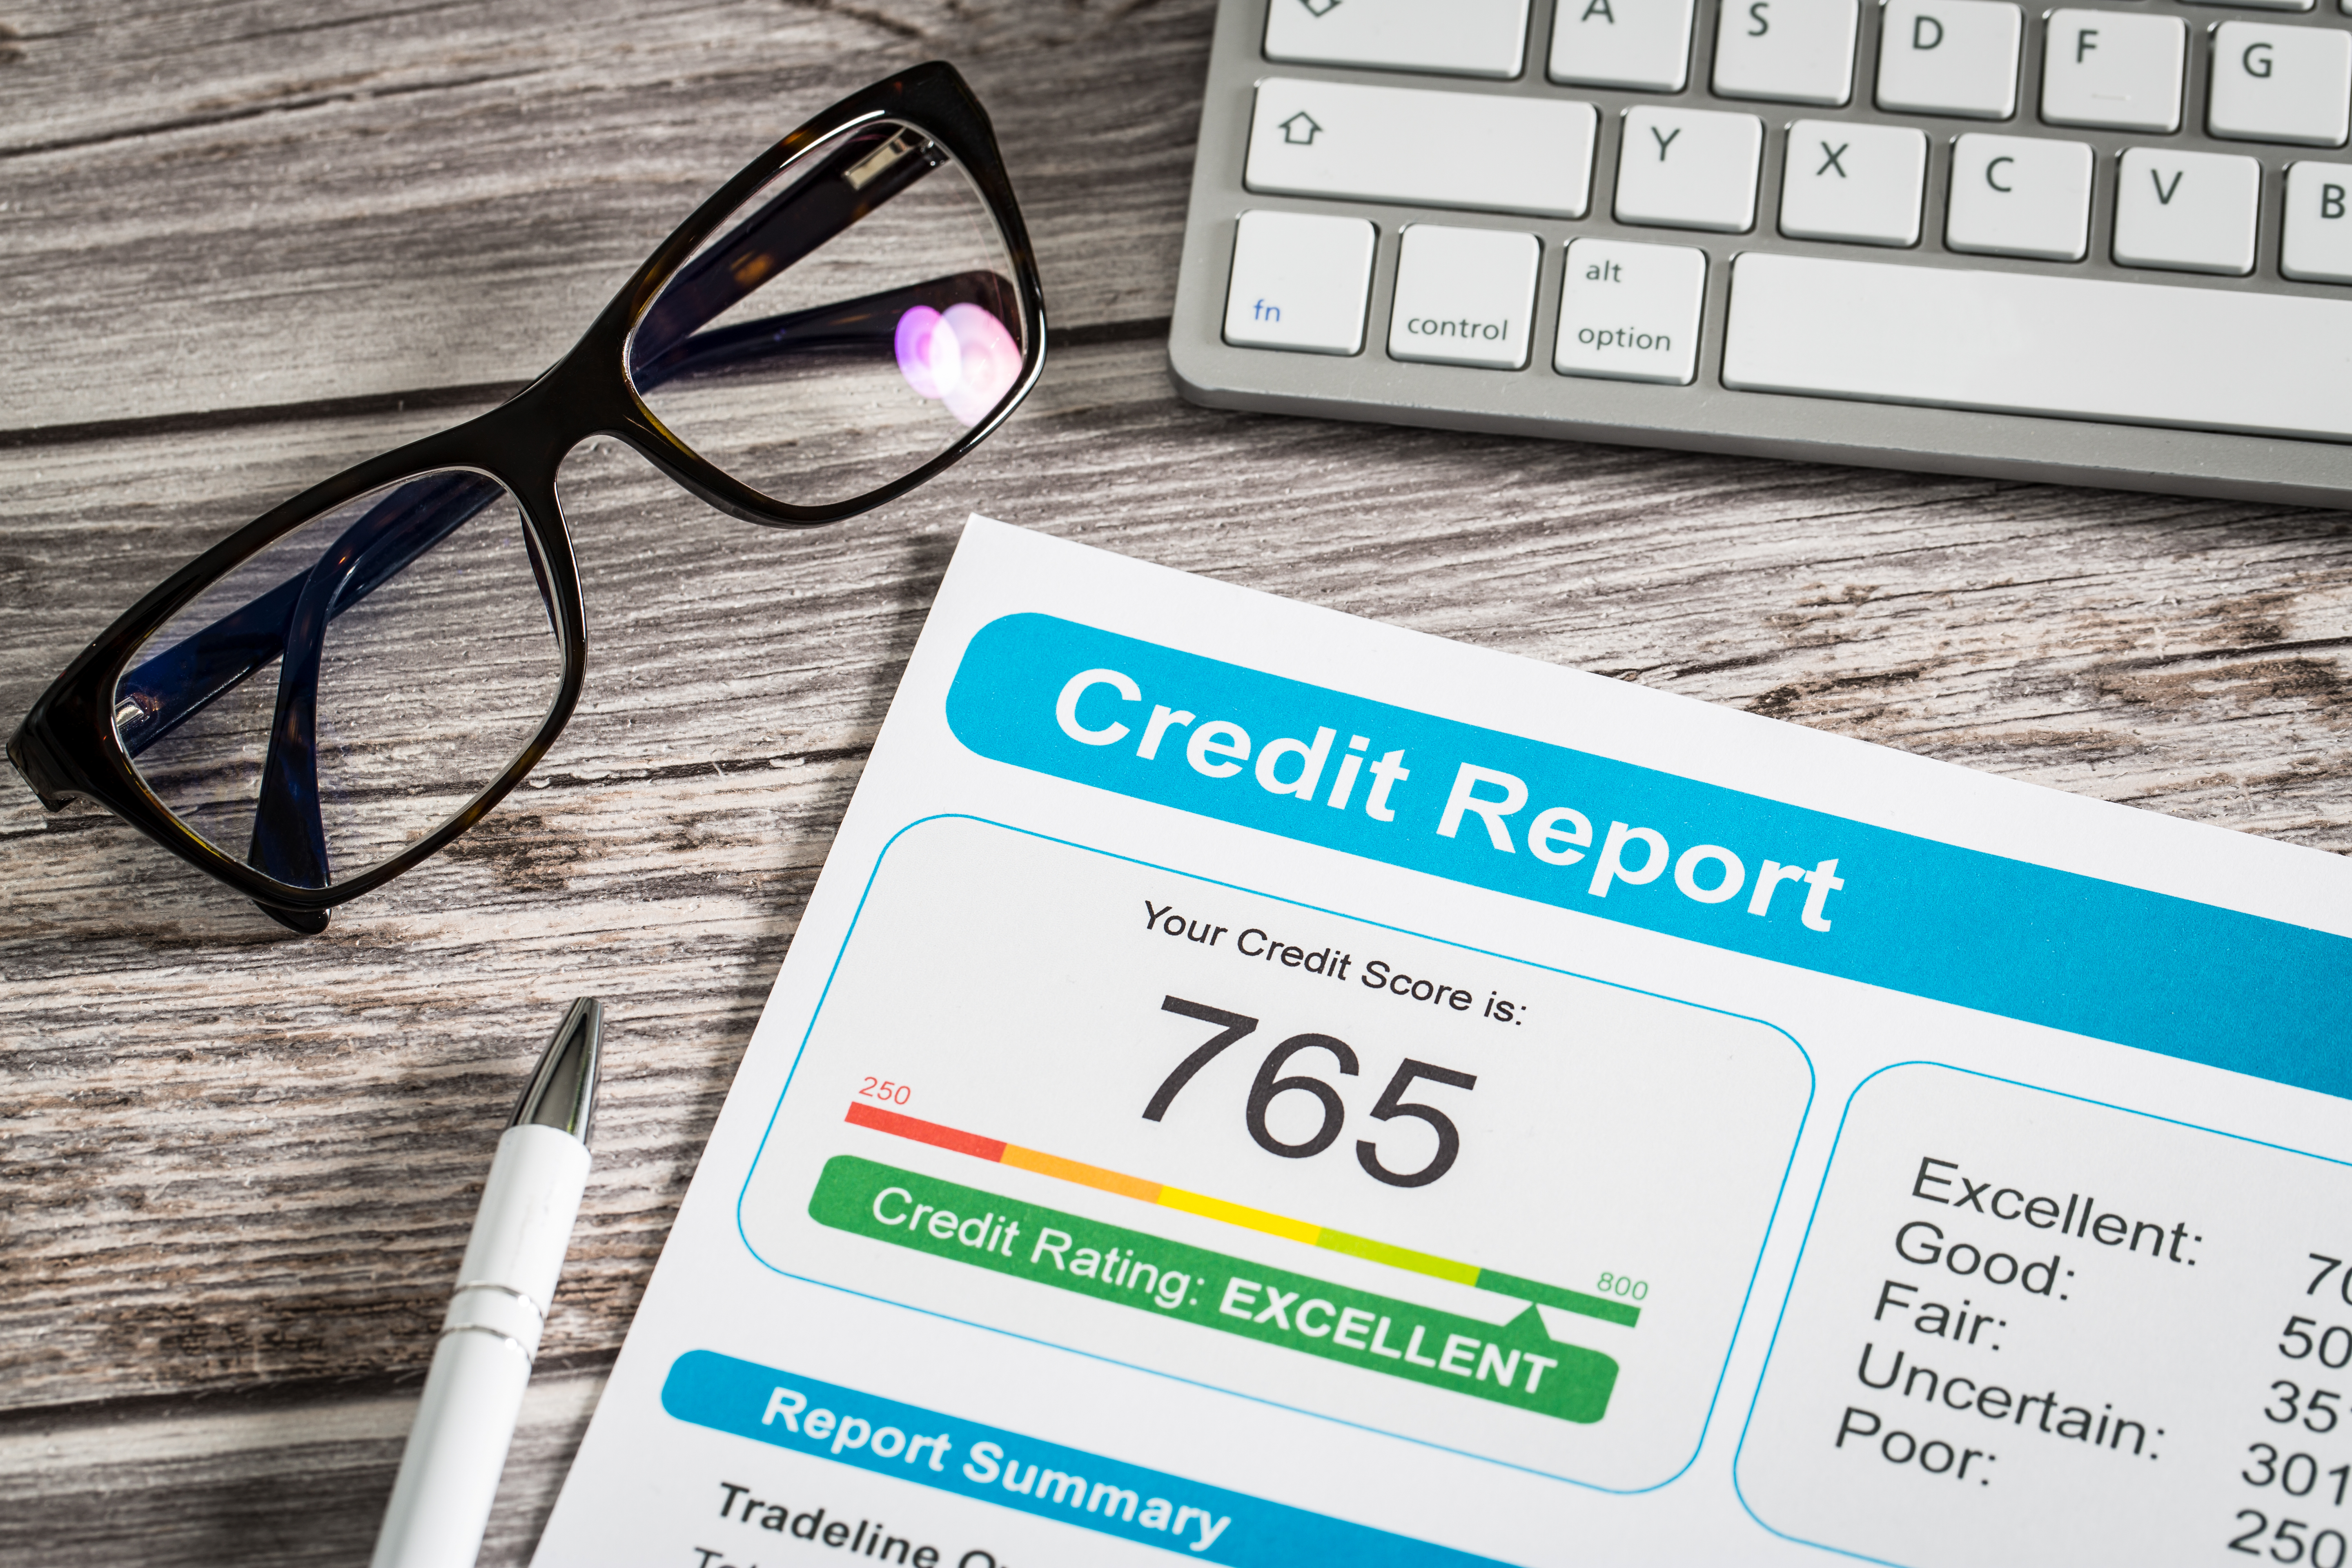 FHFA sets timeline for credit score and reporting changes